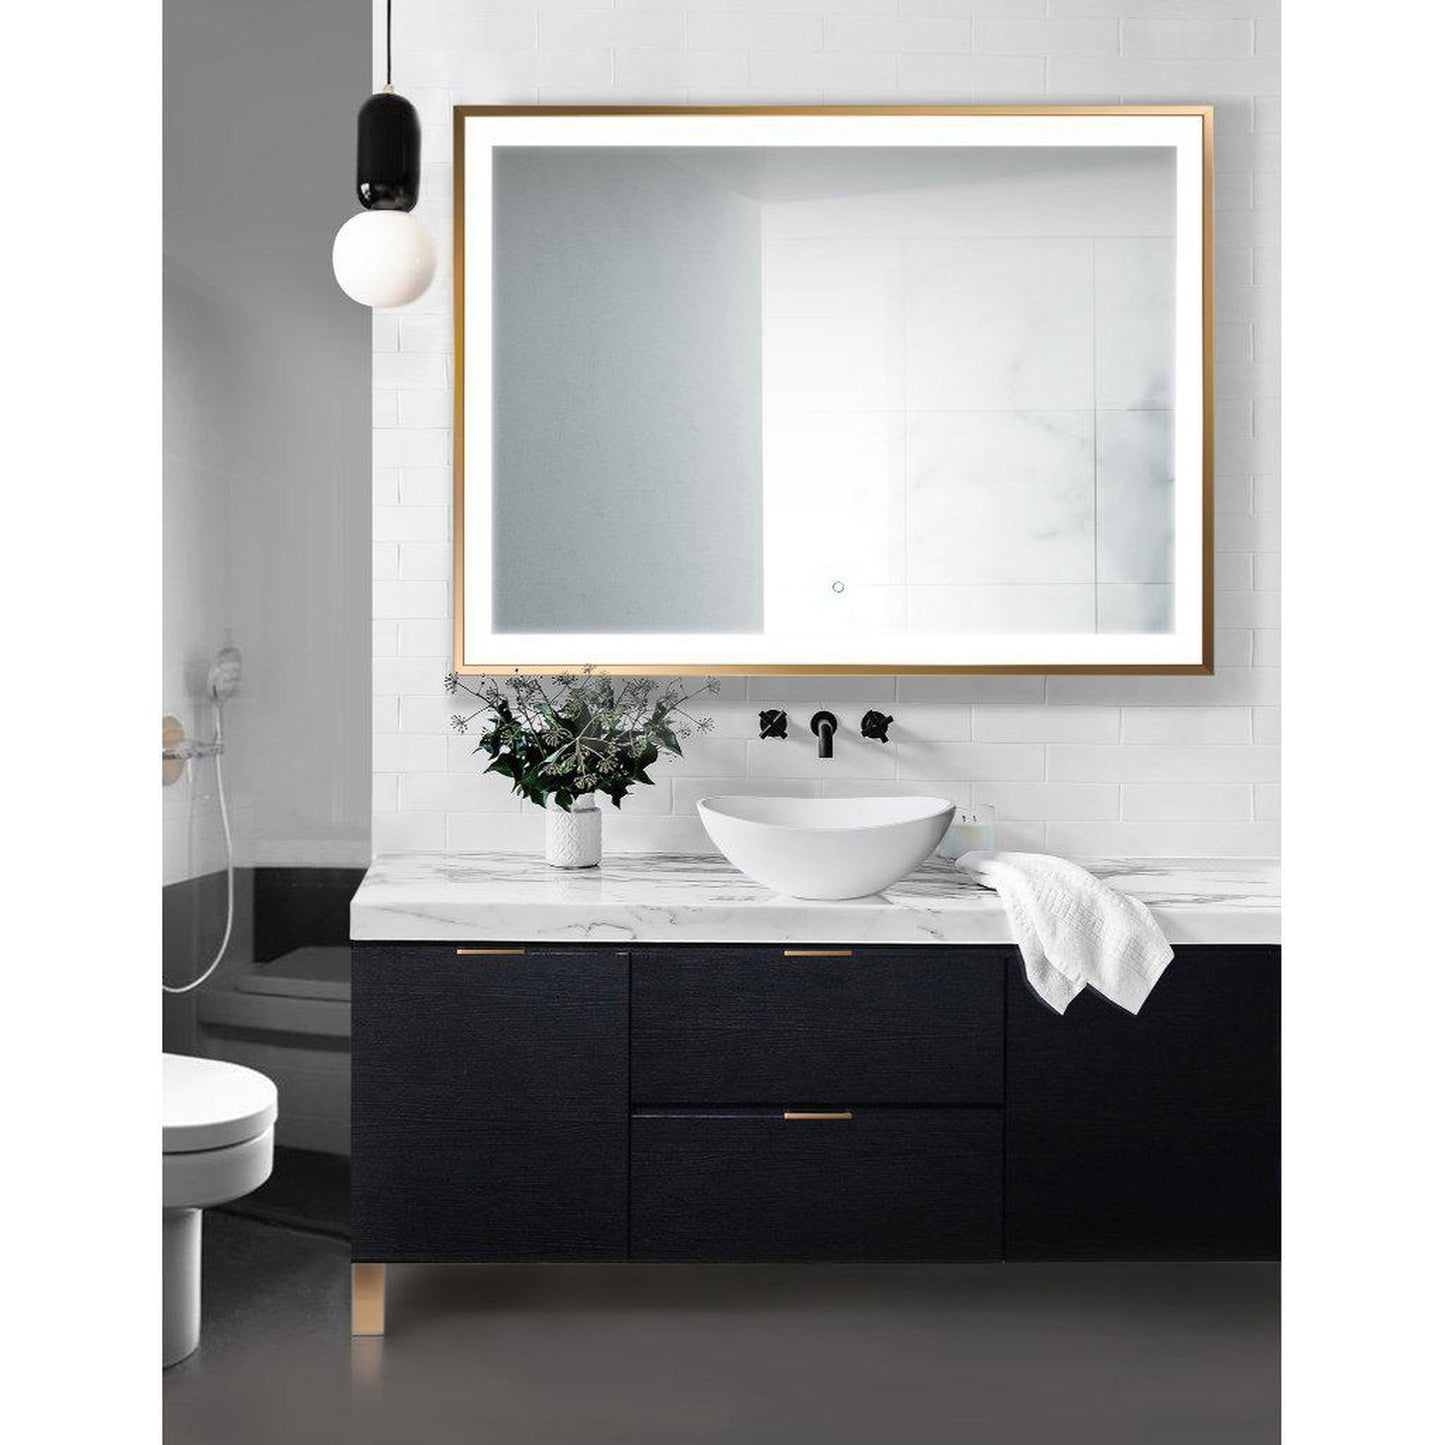 Krugg Reflections Soho 48" x 36" 5000K Rectangular Matte Gold Wall-Mounted Framed LED Bathroom Vanity Mirror With Built-in Defogger and Dimmer